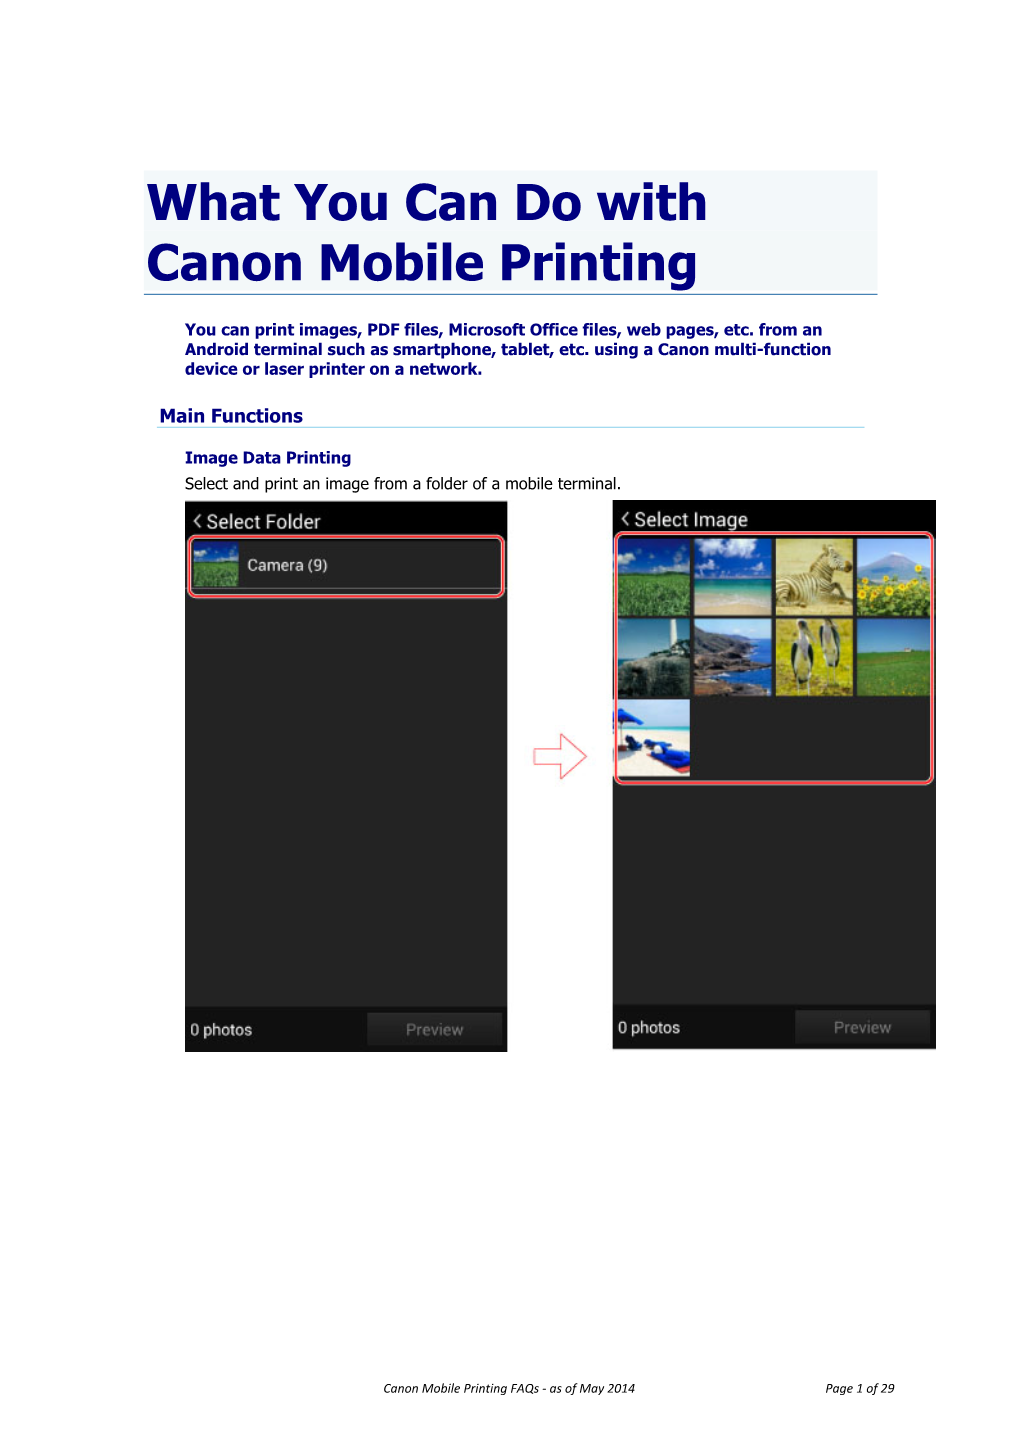 What You Can Do with Canon Mobile Printing